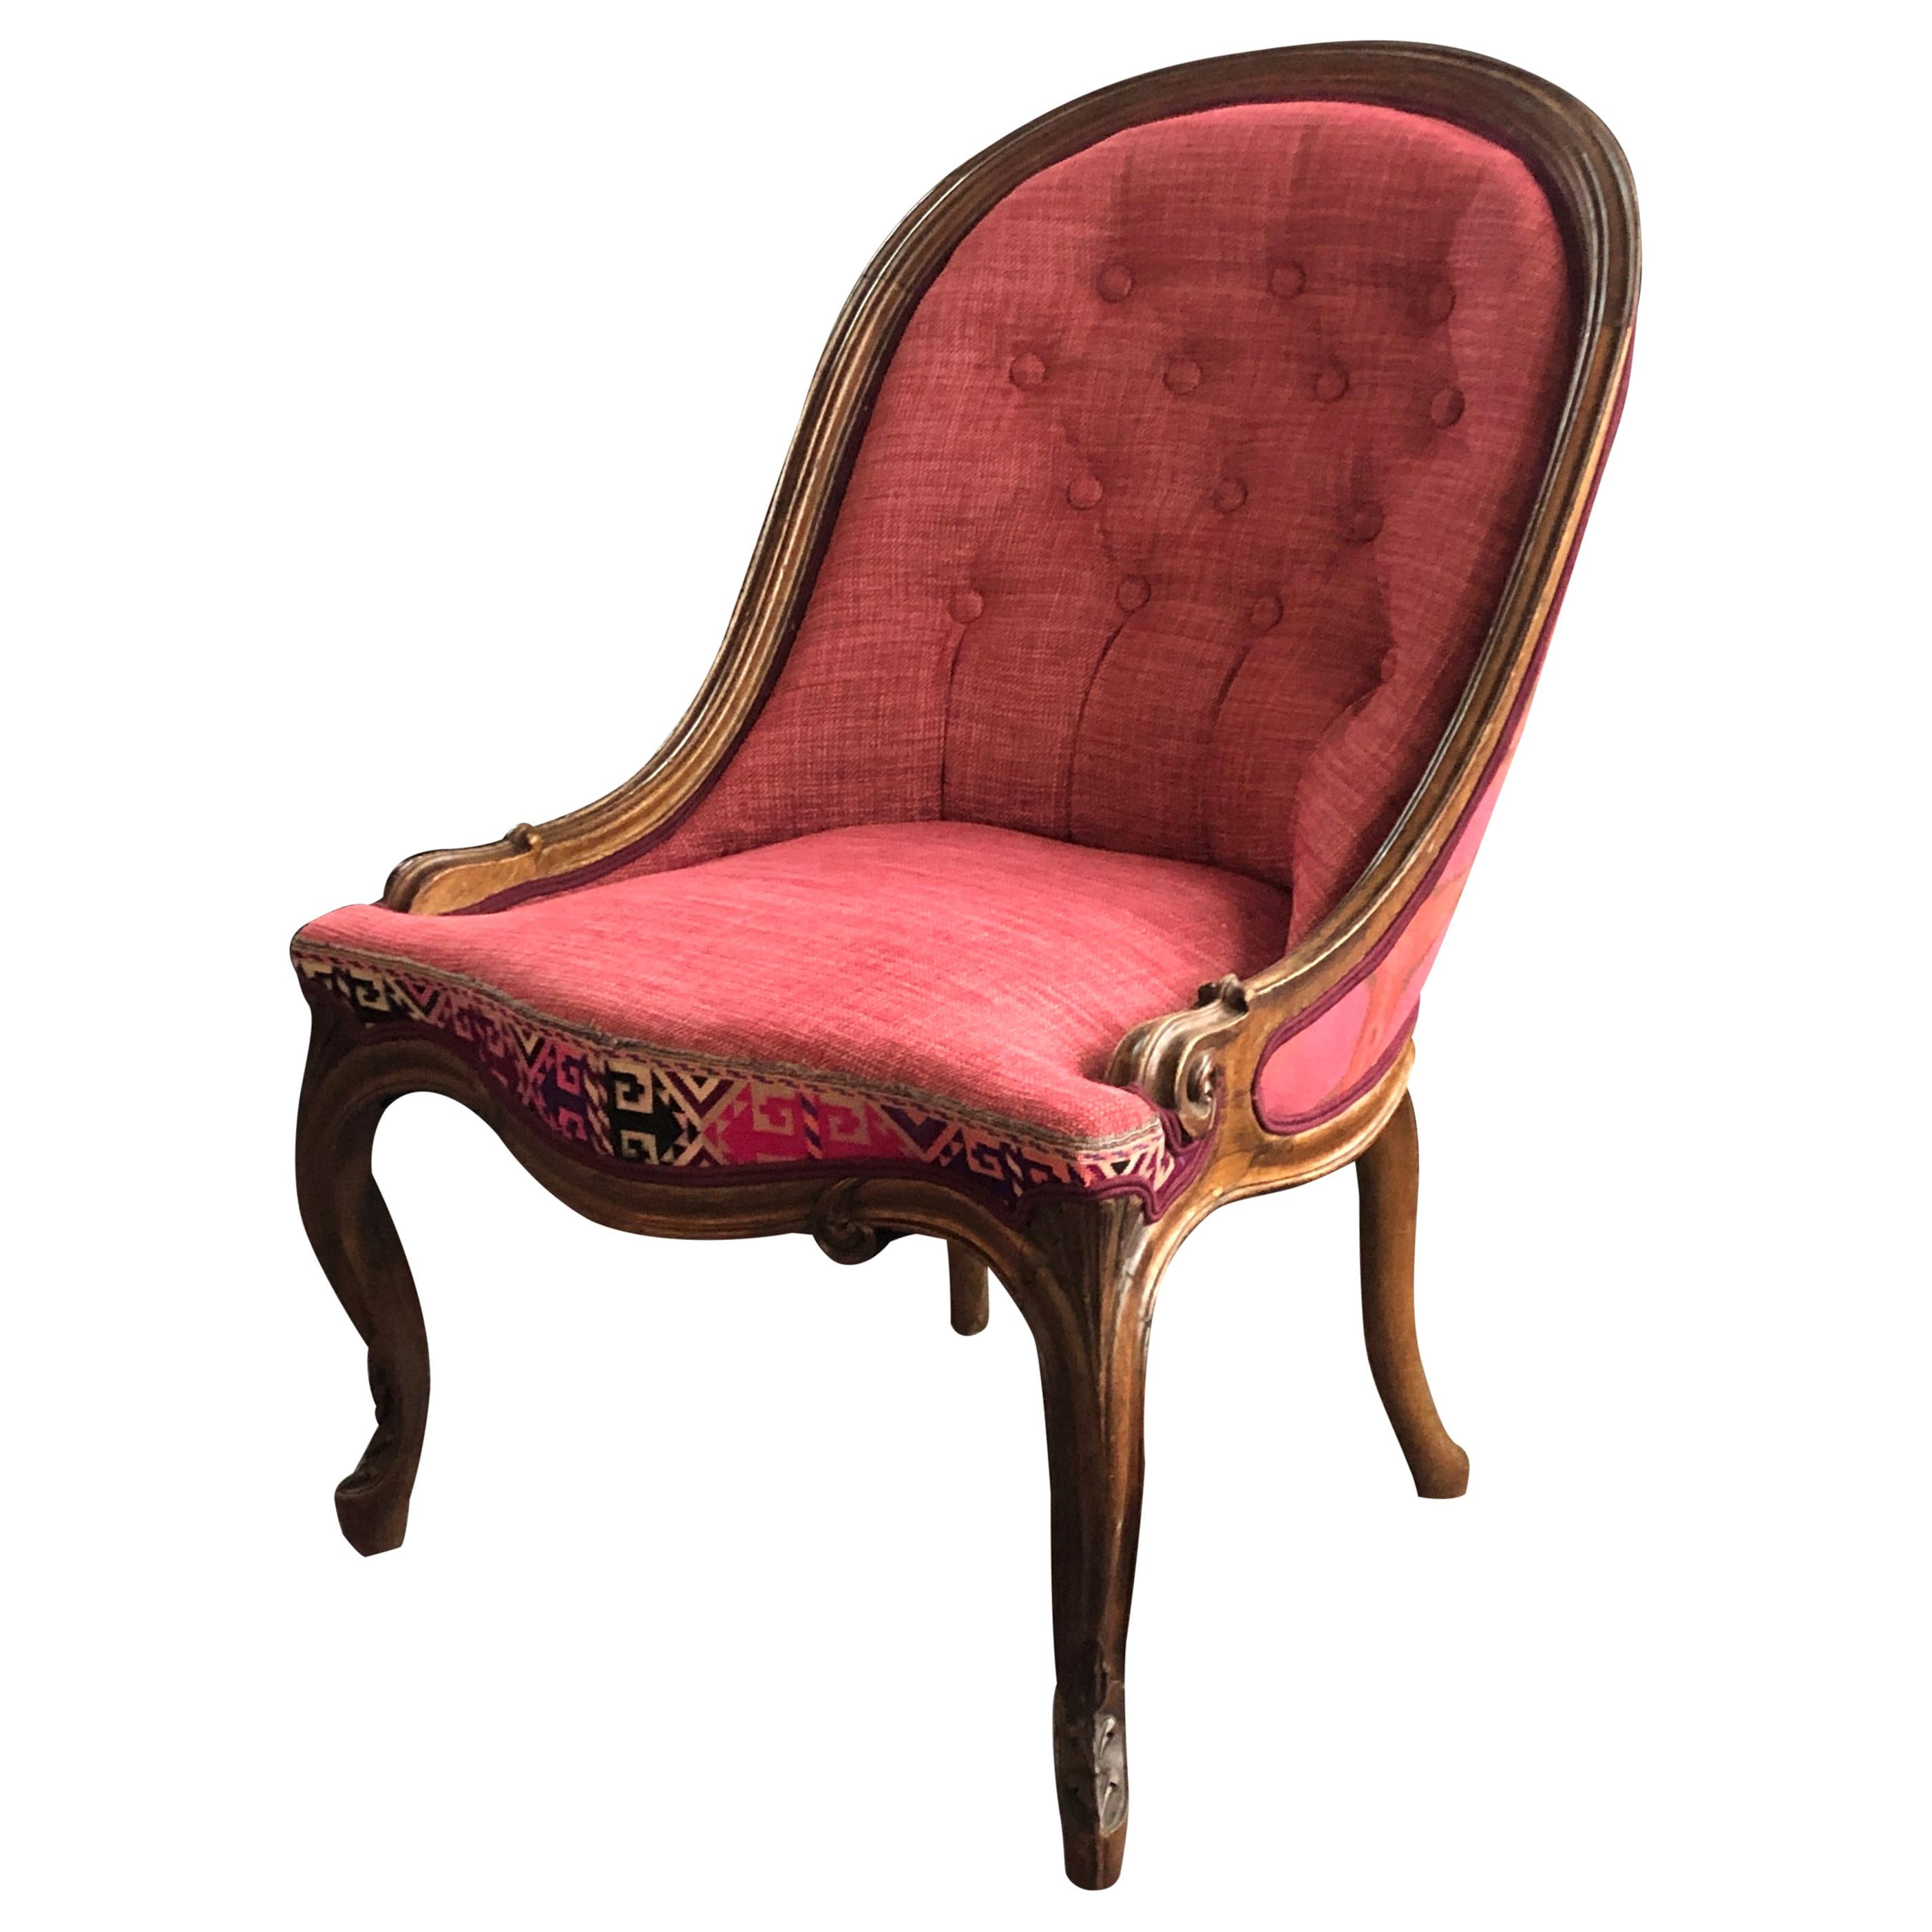 Antique Nursing Chair 19th Century with Antique Embroidered Strip For Sale